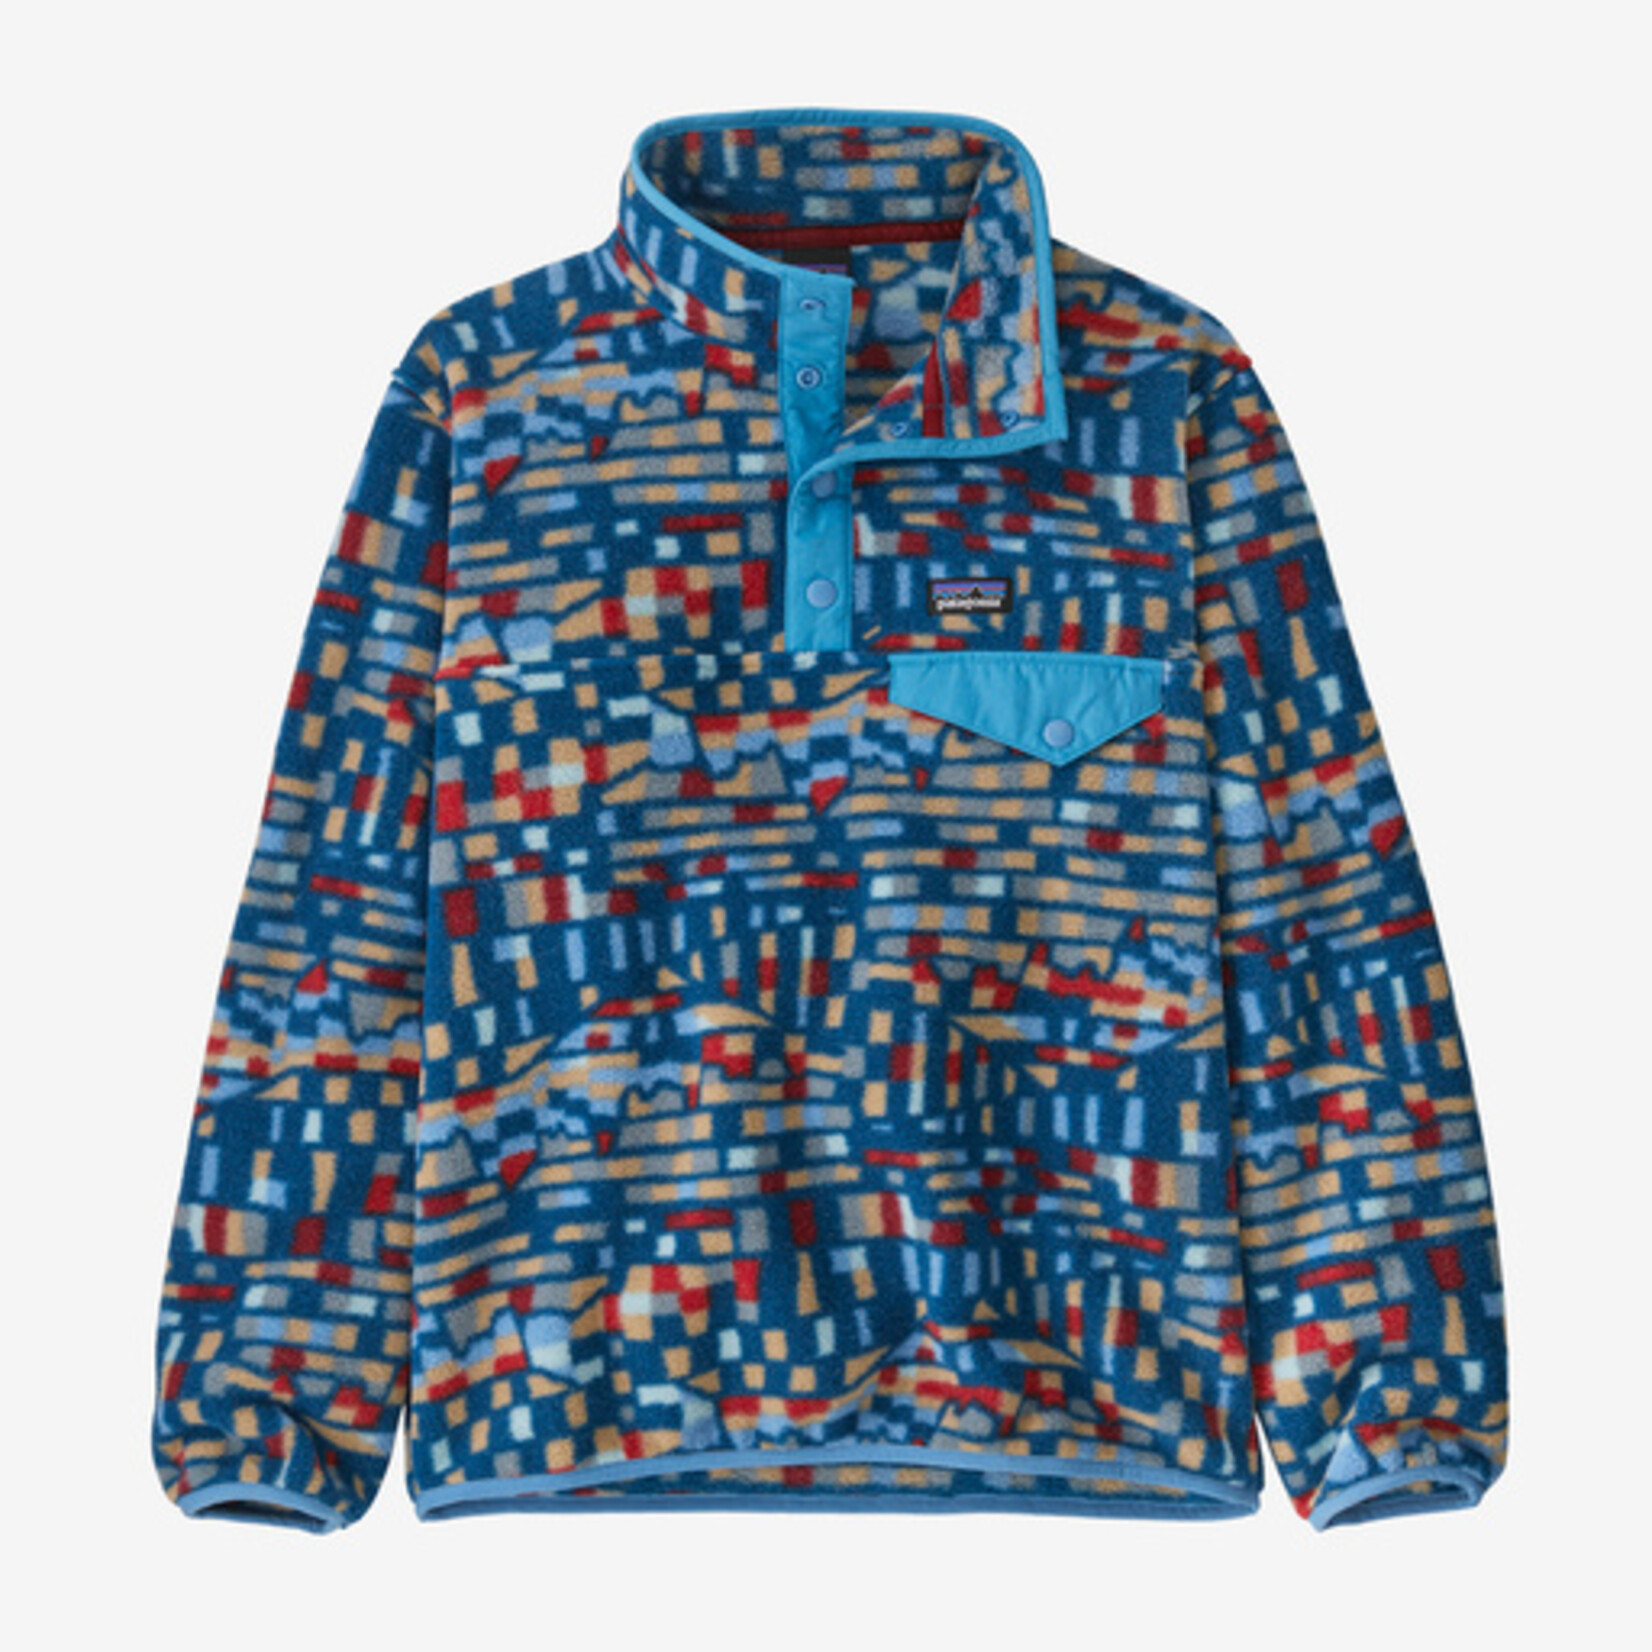 Patagonia K’s Lw synch snap